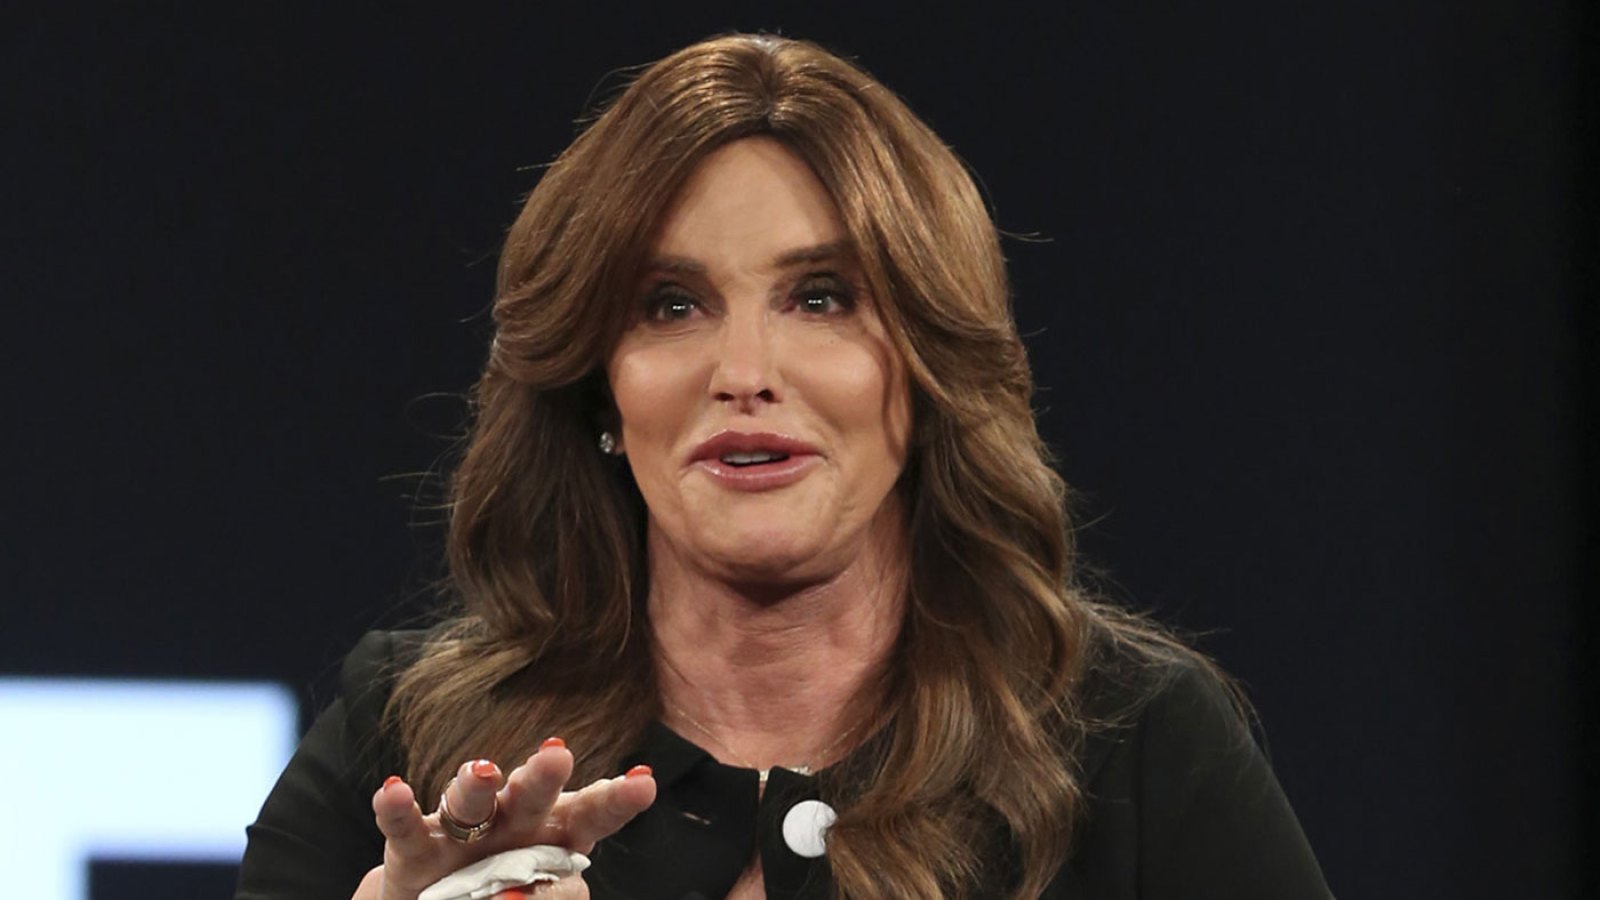 Caitlyn Jenner speaks on stage at the 2016 MAKERS Conference